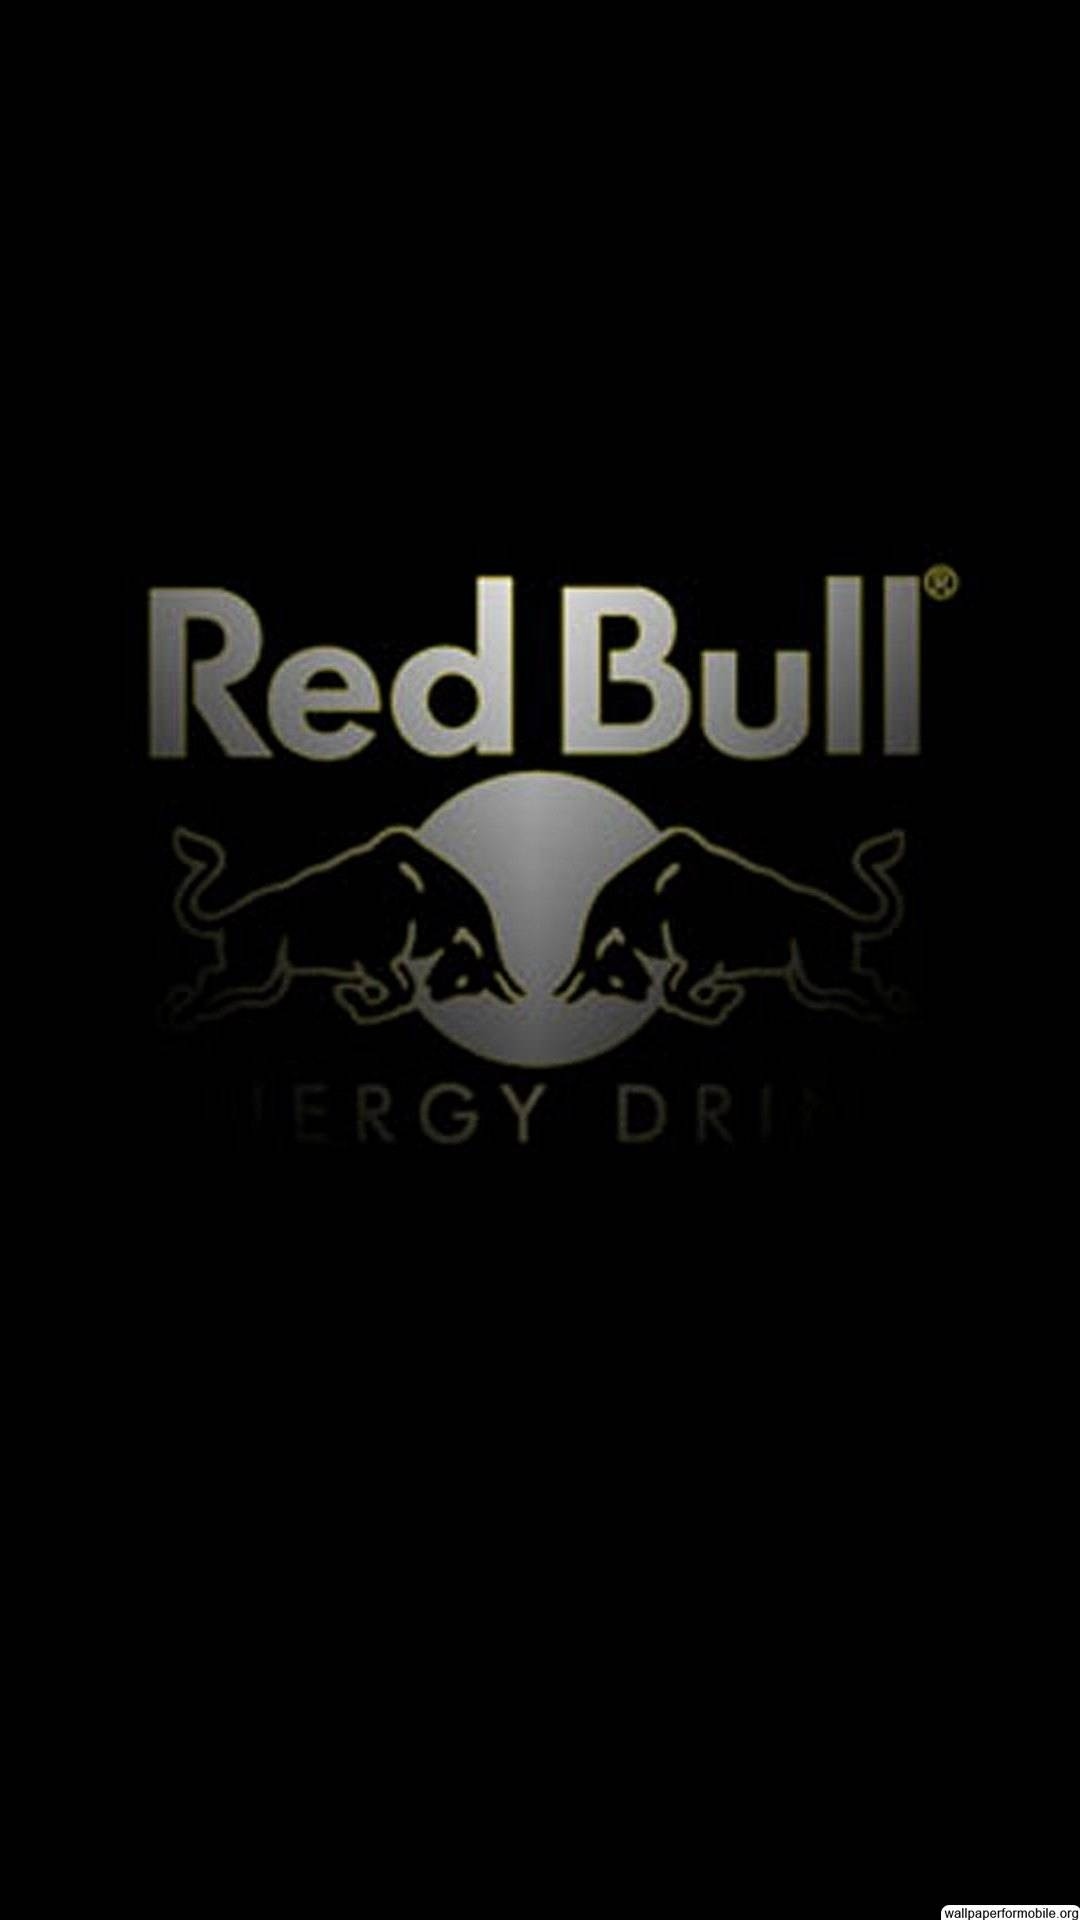 1080x1920 Wallpaper Red Bull Para Iphone - Download New Wallpaper Red Bull Para  Iphonefor iPhone Wallpaper inHigh